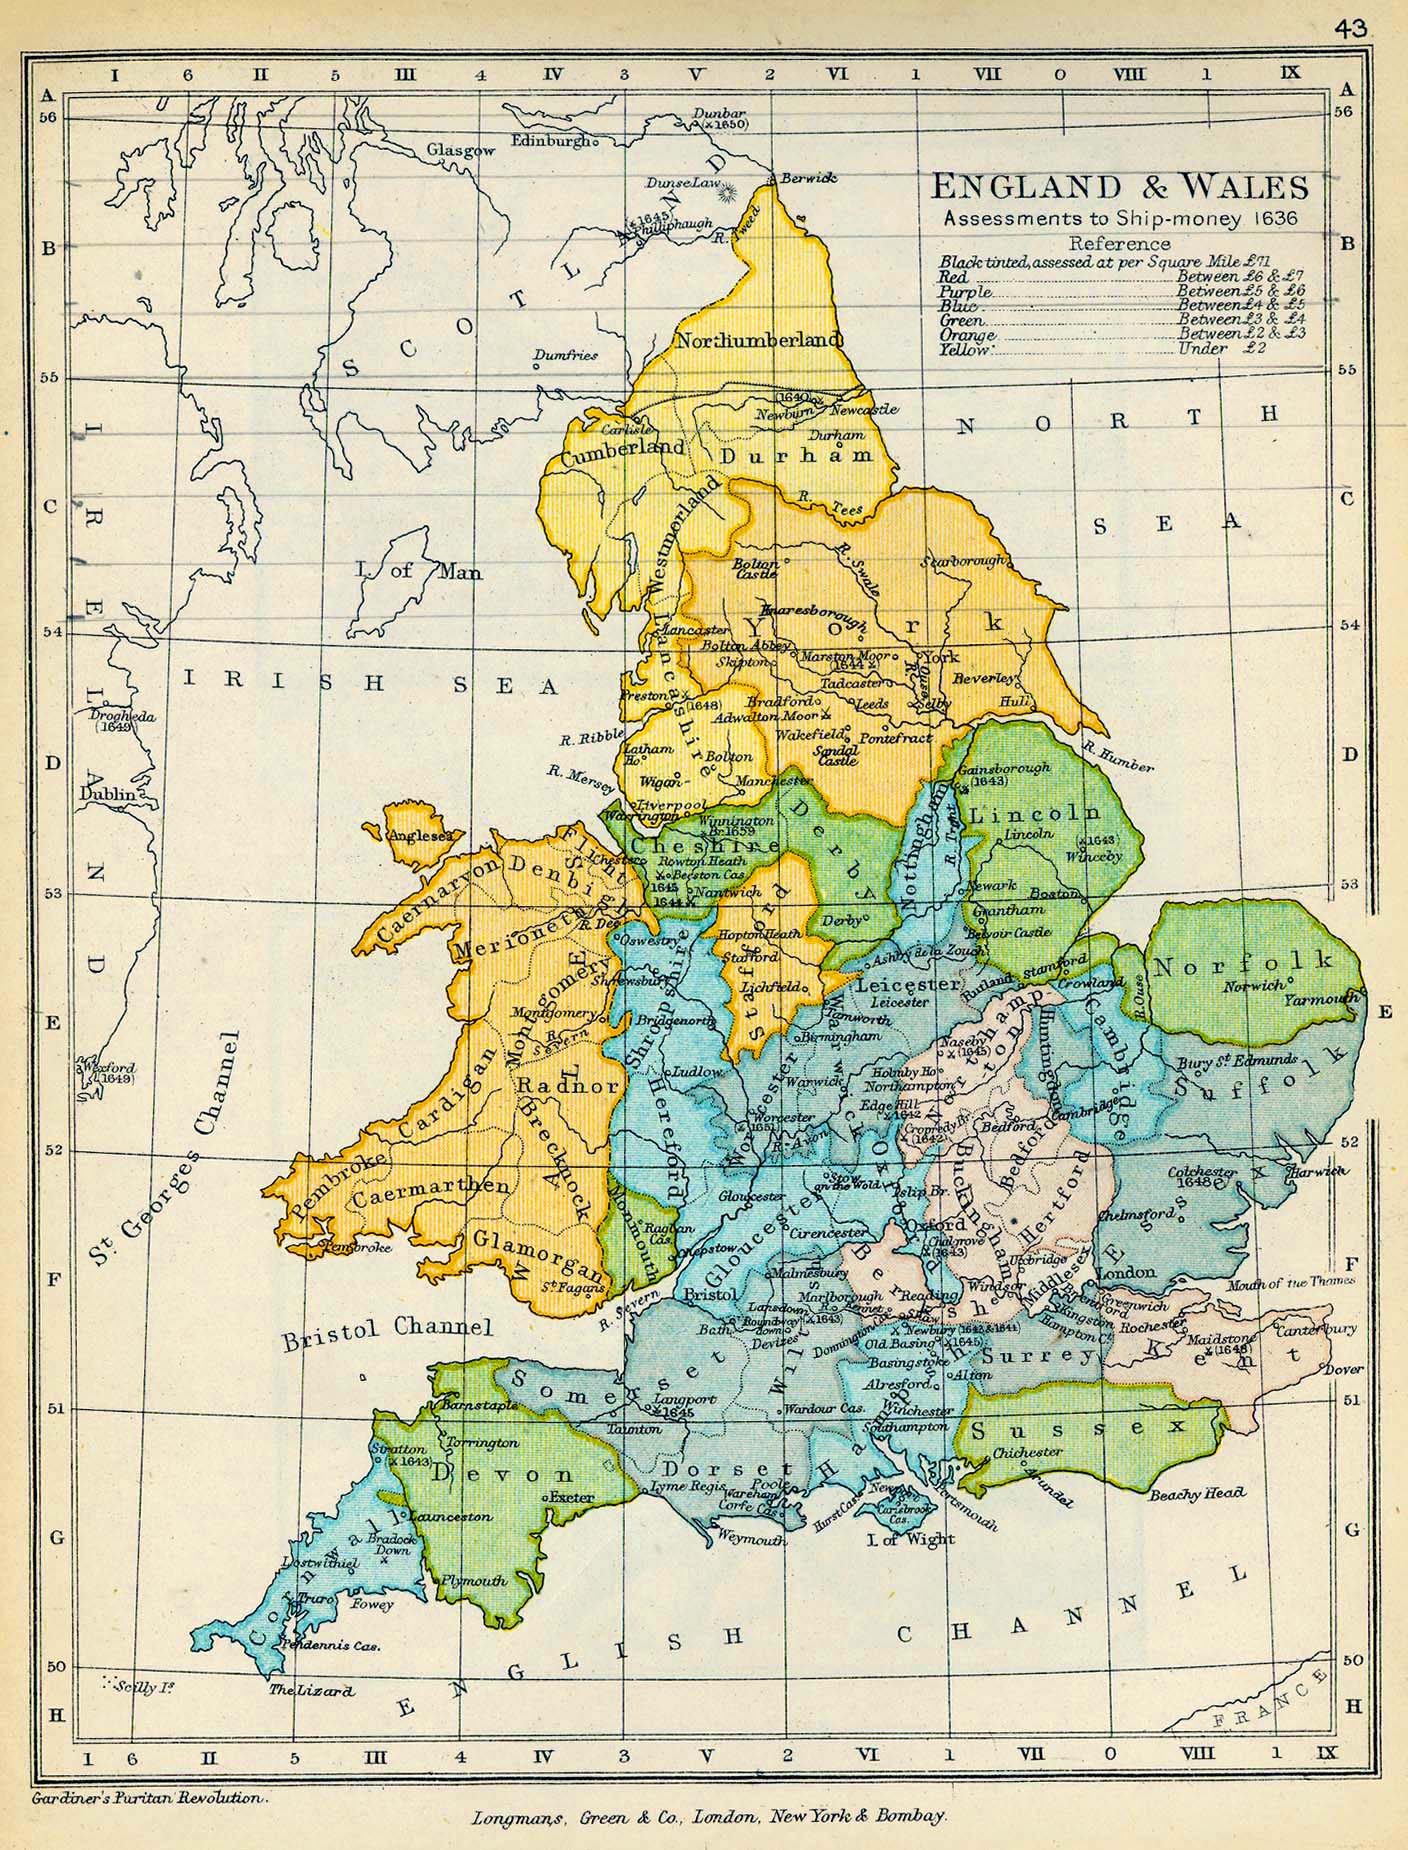 Map of England and Wales Assessments to Ship-money 1636